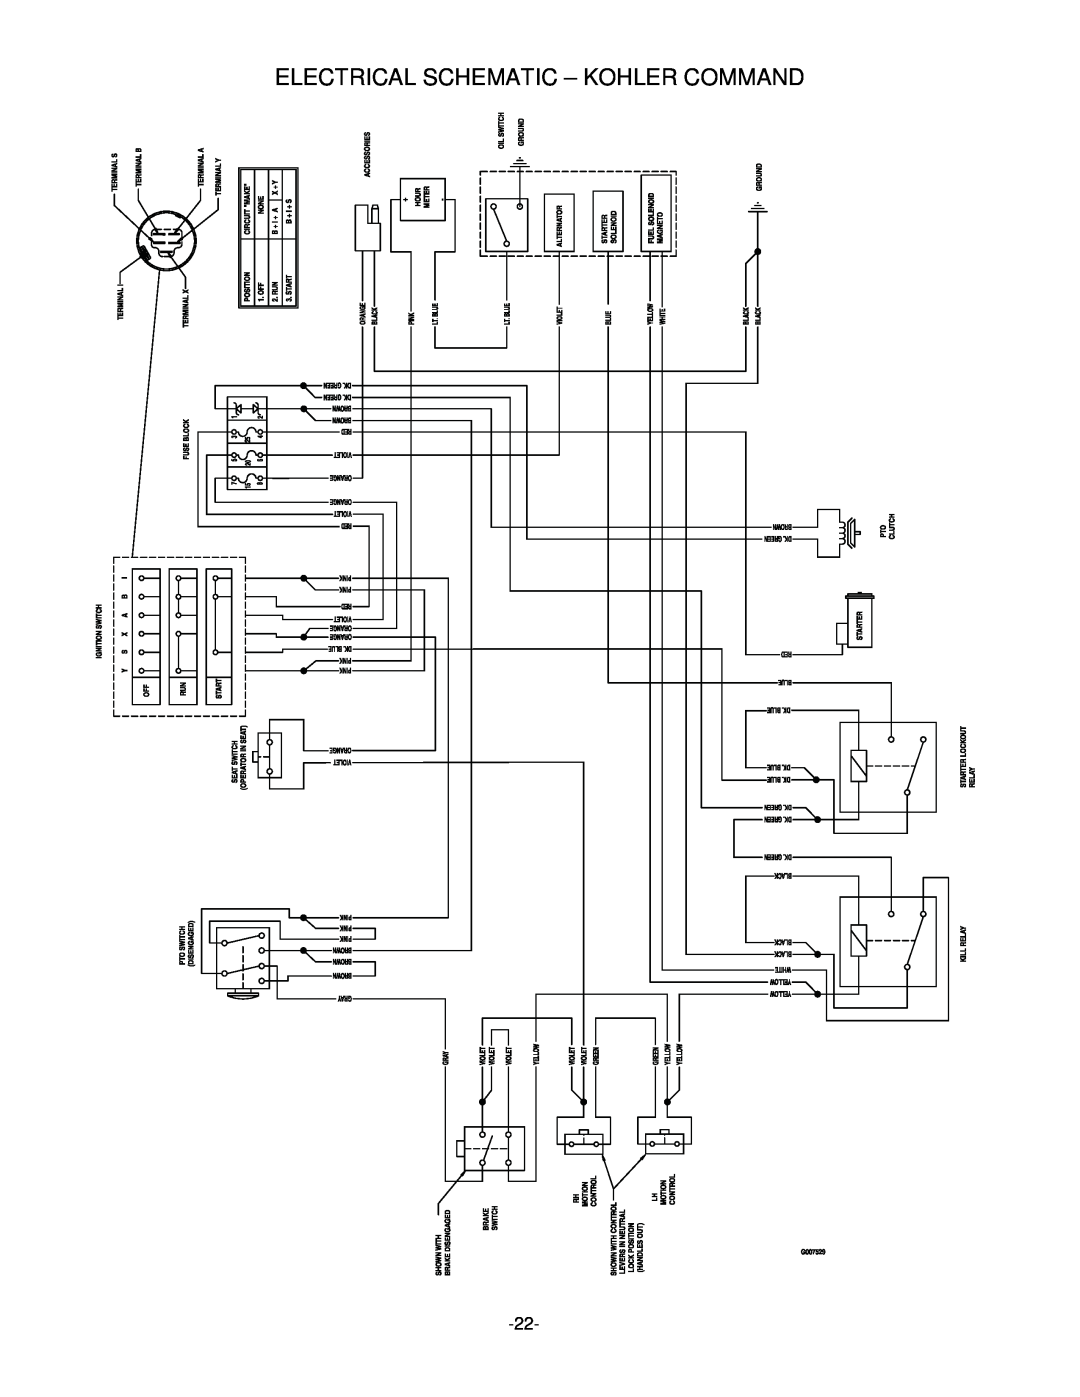 Exmark 4500-339 manual Electrical Schematic - Kohler Command 